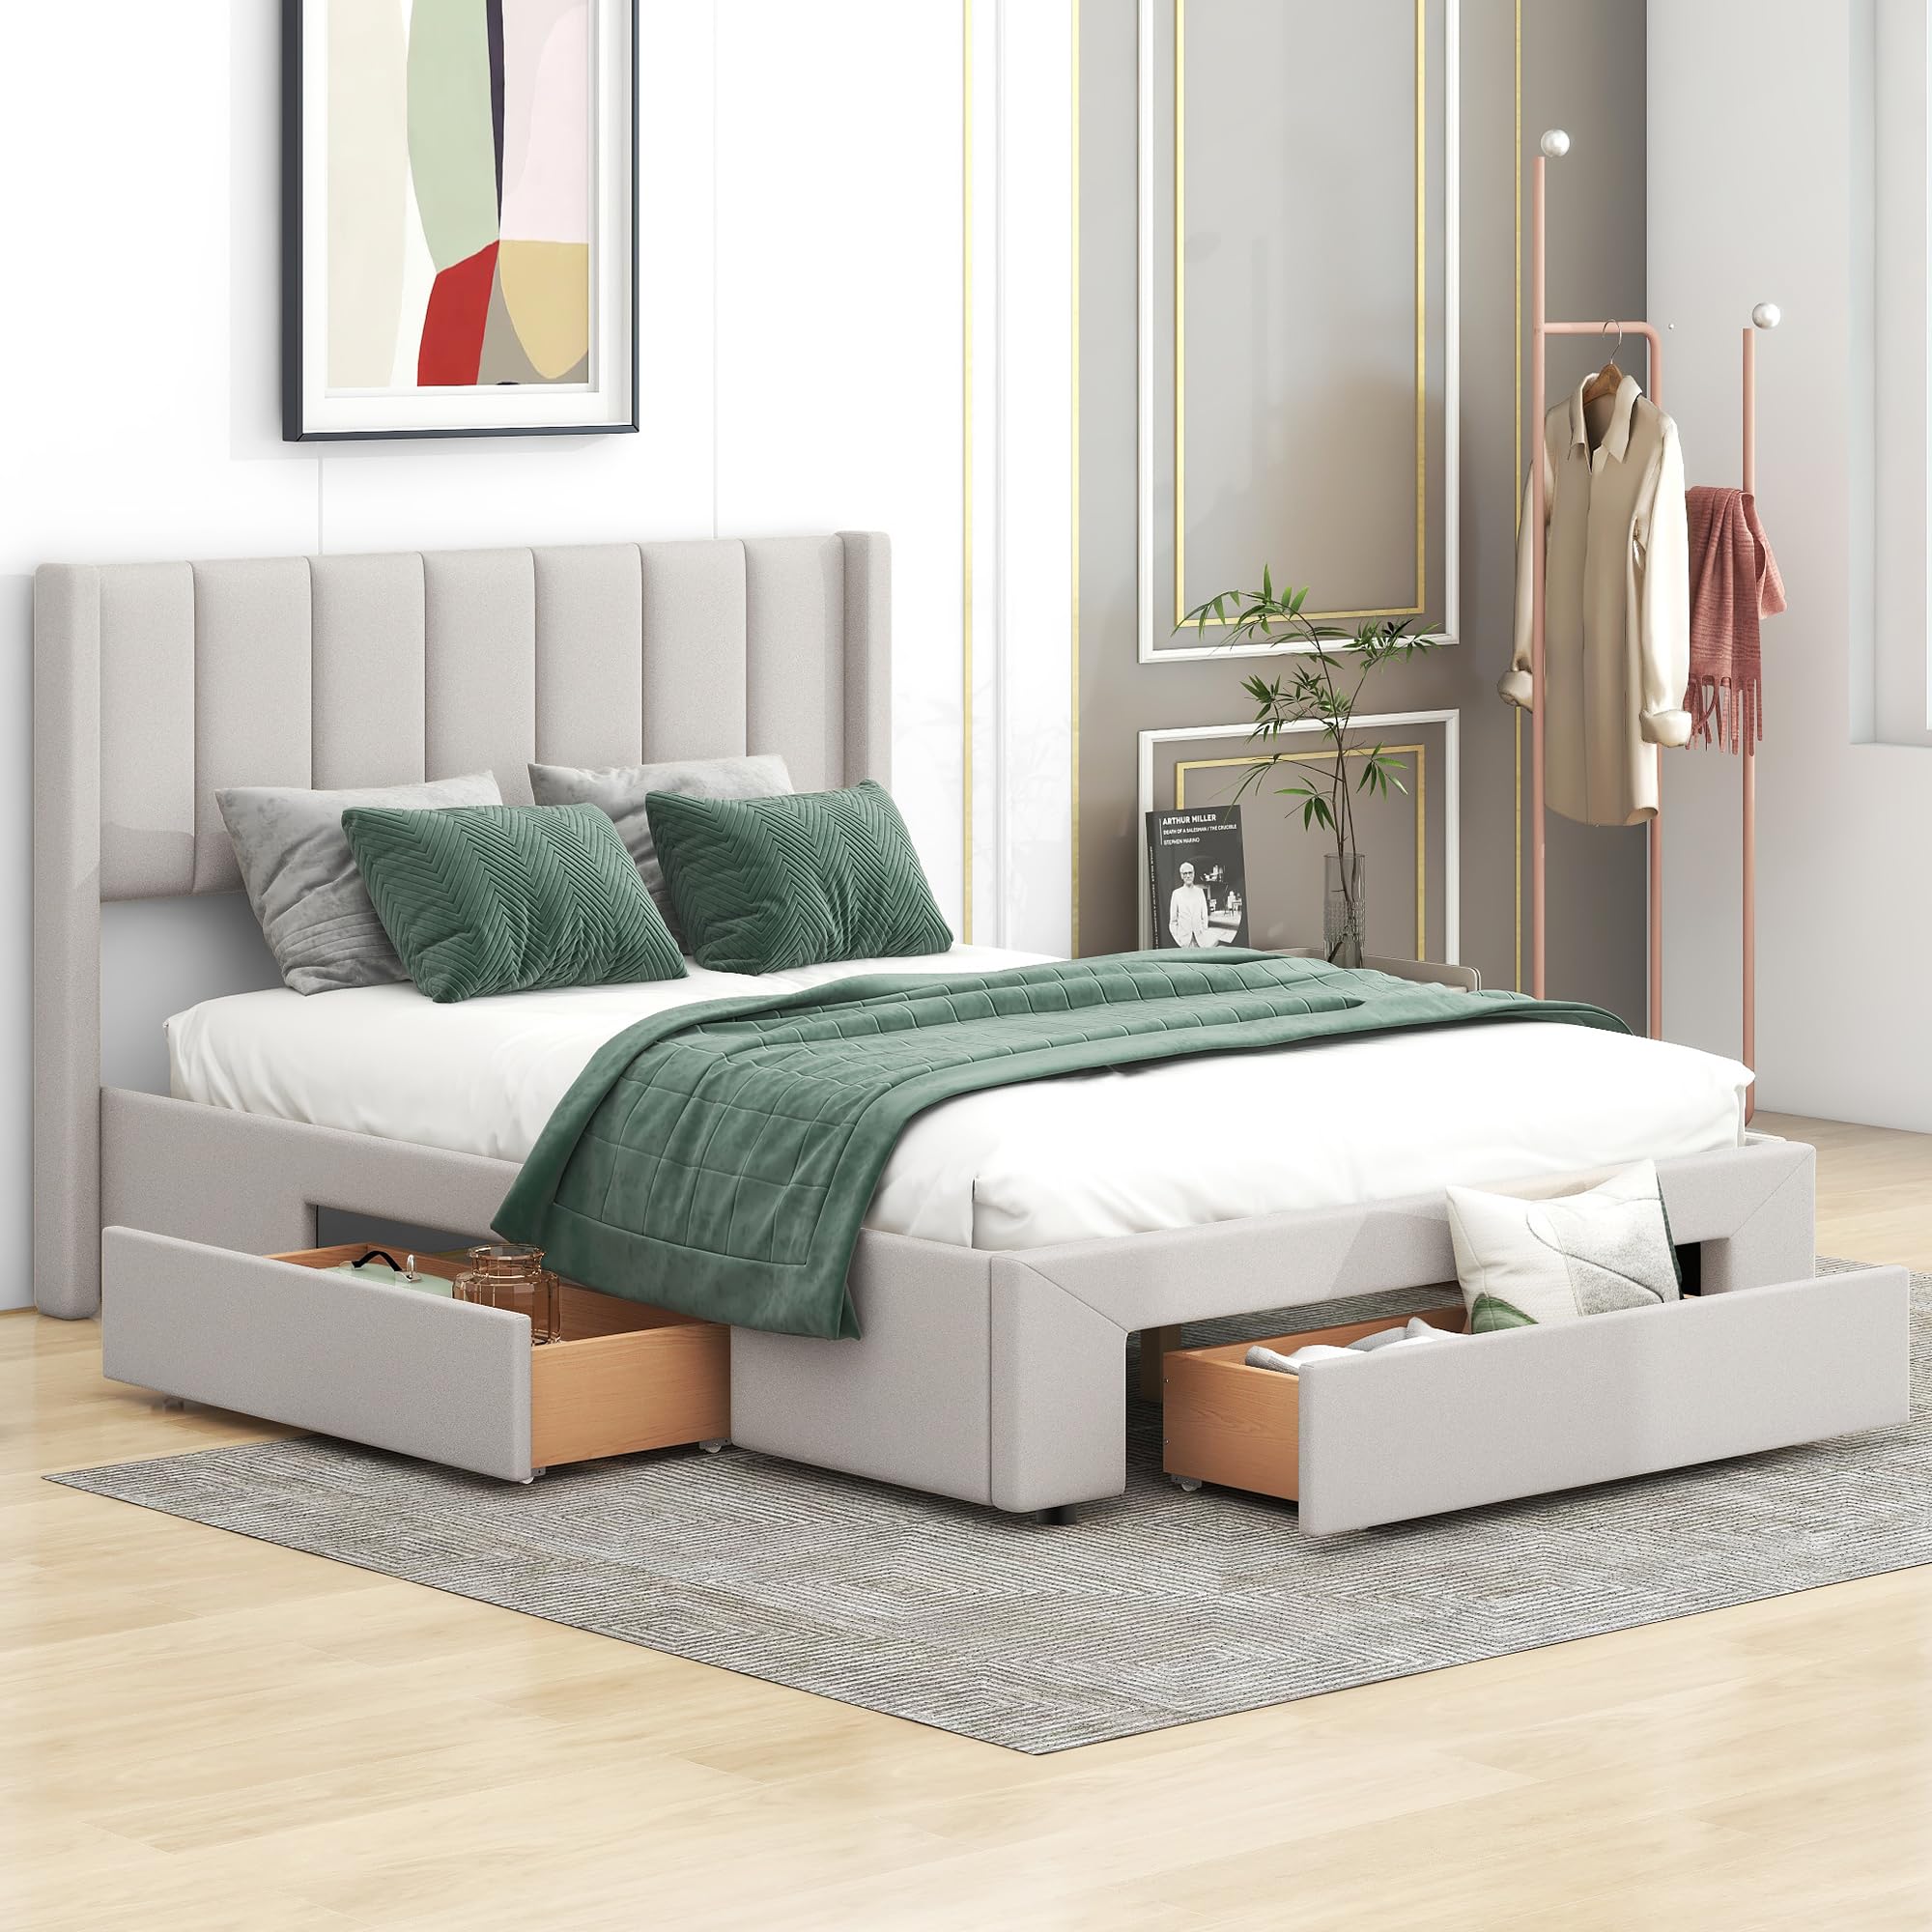 Morhome Upholstered Queen Size Platform Bed Frame with 3 Storage Drawers and Headboard, Button Tufted Mattress Foundation Wooden Slats Support, No Box Spring Needed